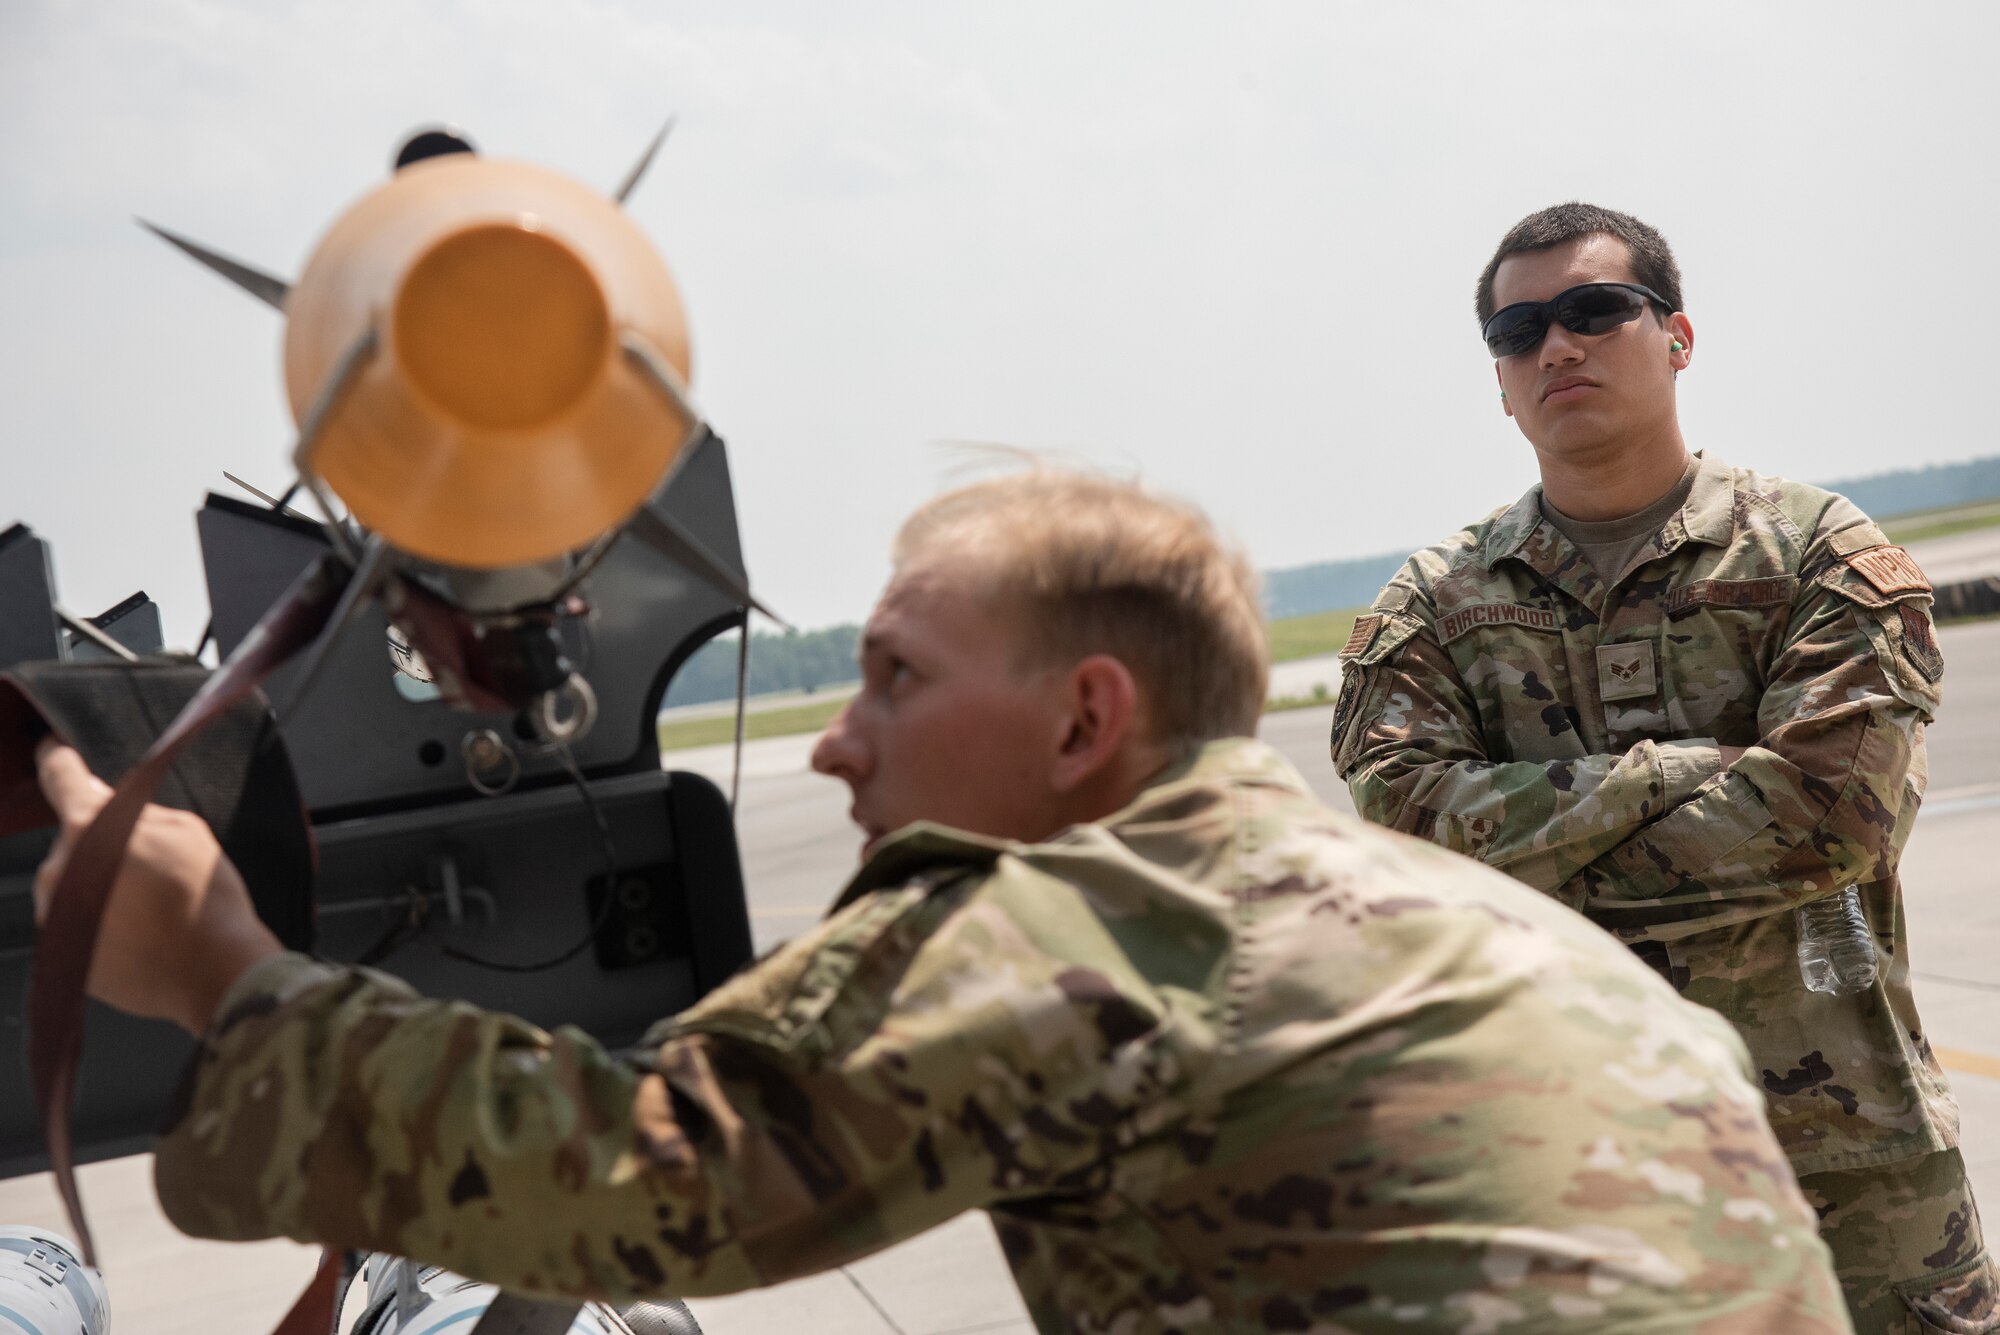 Senior Airman Canaan Birchwood, right, 4th Maintenance Group loading standardization crew member, evaluates Airman 1st Class Isaac Bergfield, 335th Fighter Generation Squadron weapons load crew member, during a weapons standardization load evaluation.